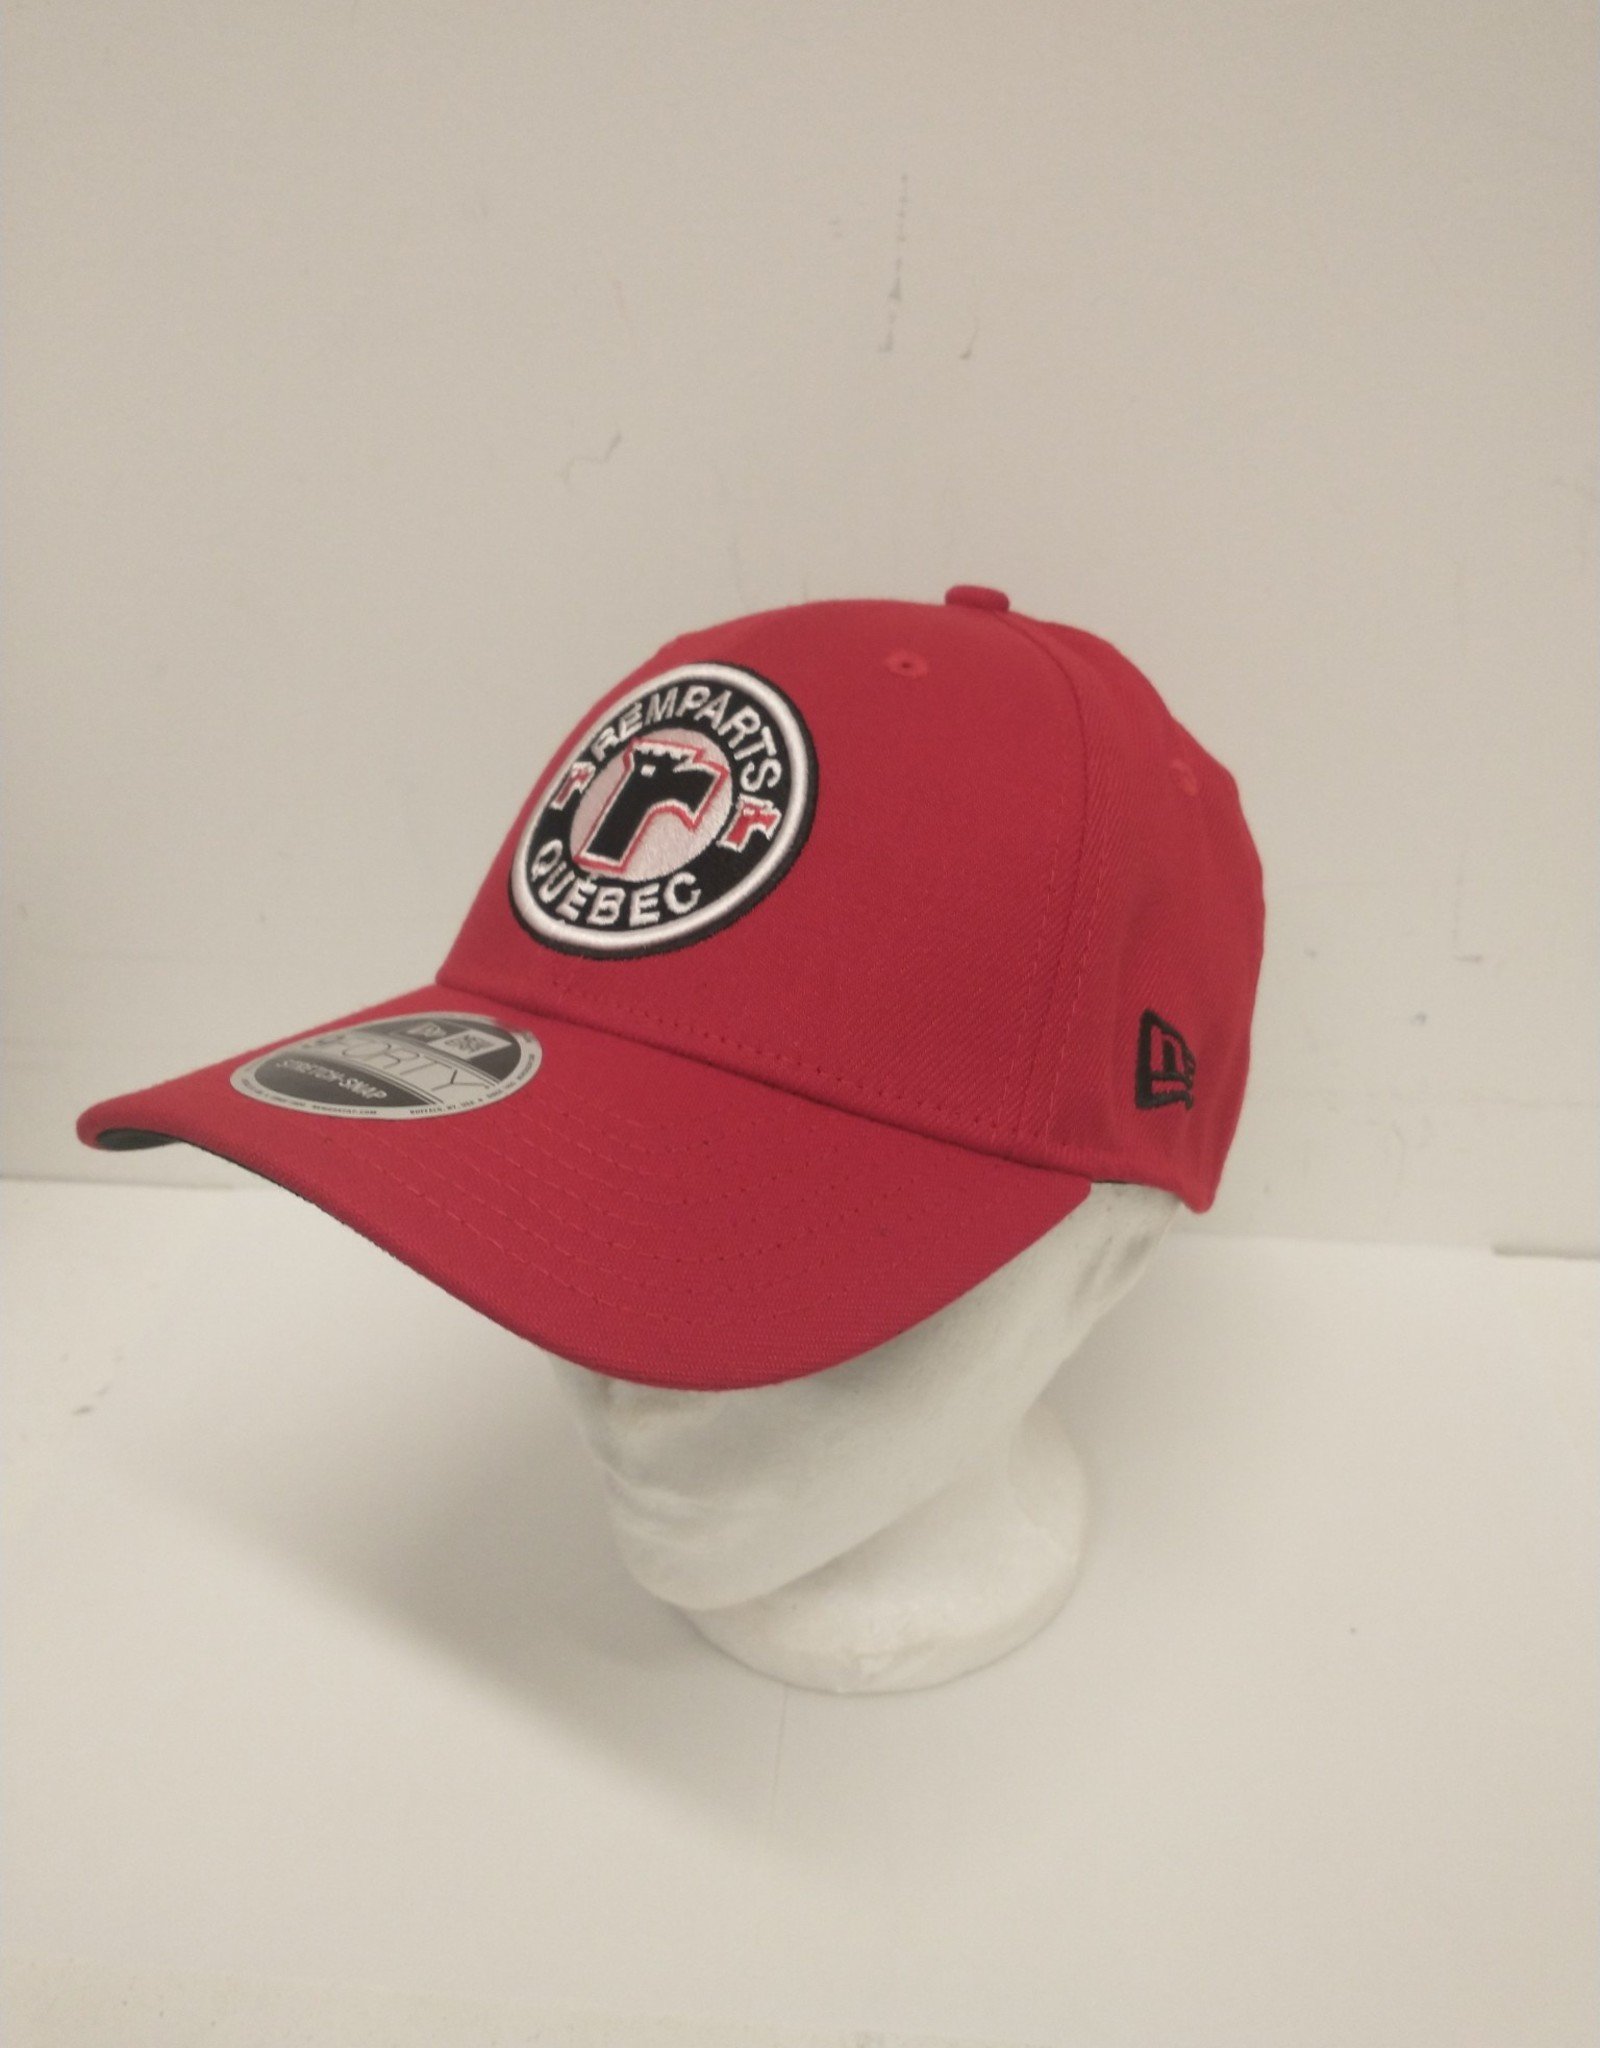 Casquette 940SS  Rouge - Adulte